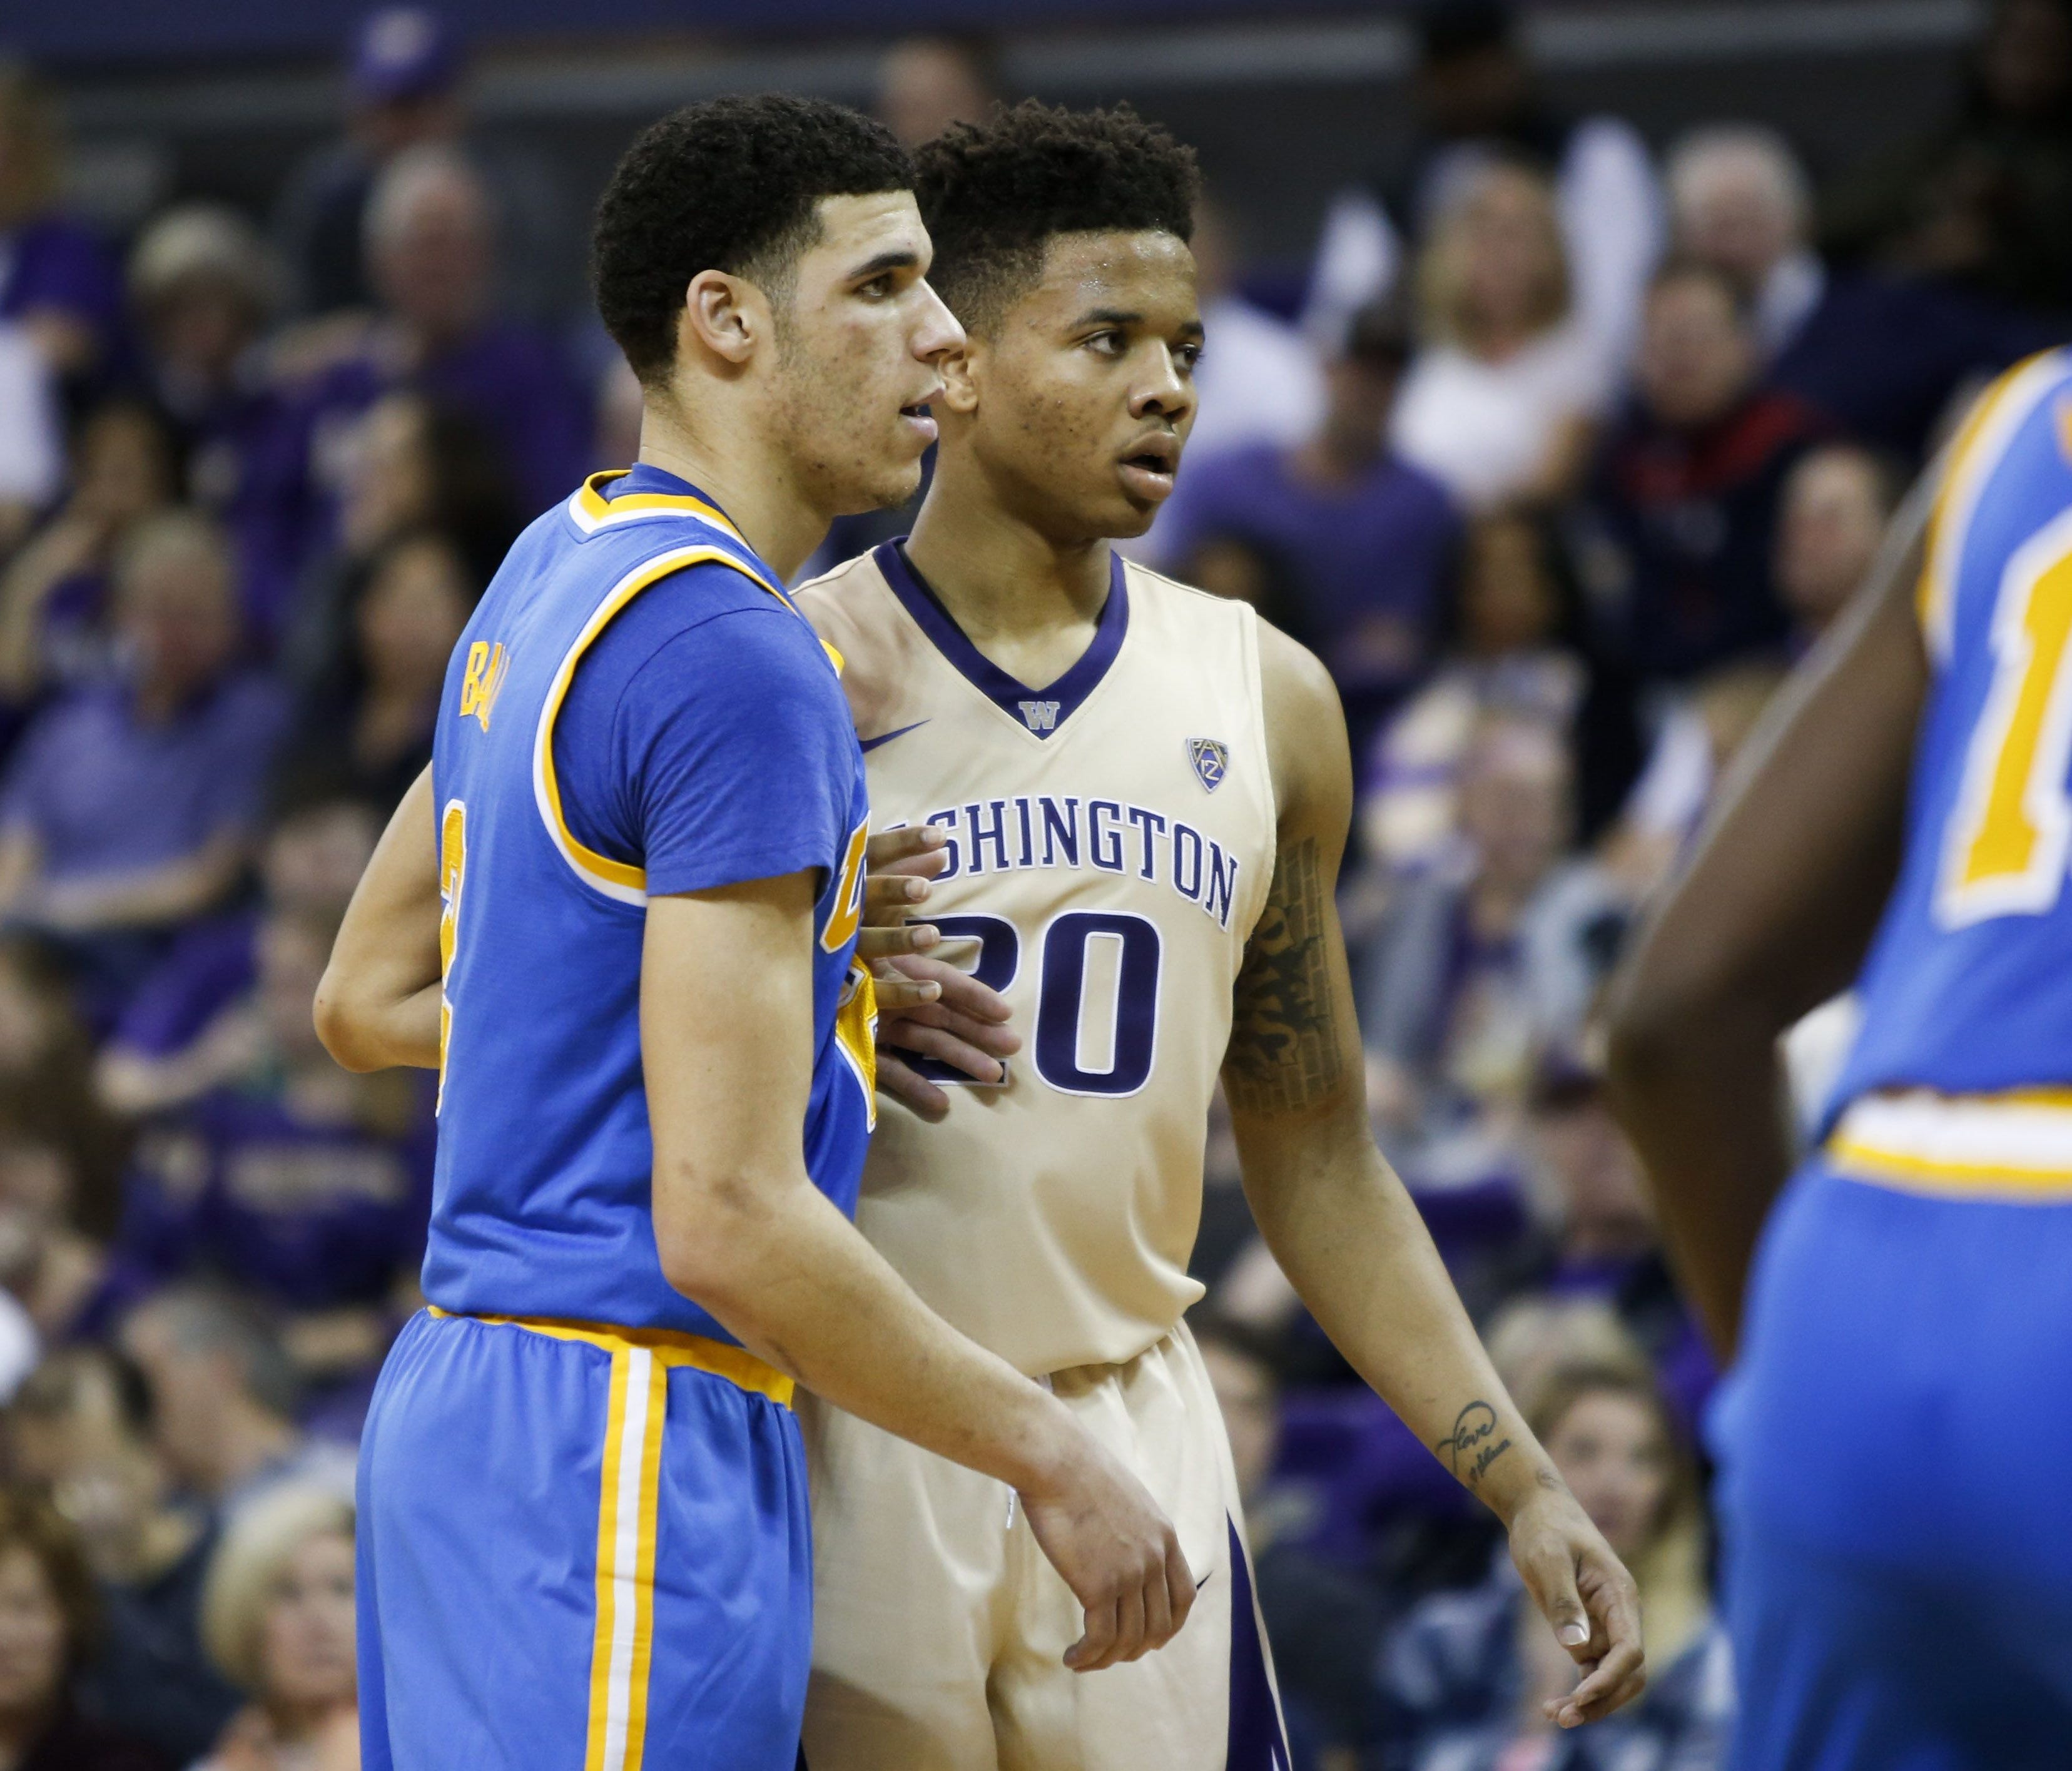 Lonzo Ball and Markelle Fultz guard each other during a game at Alaska Airlines Arena.